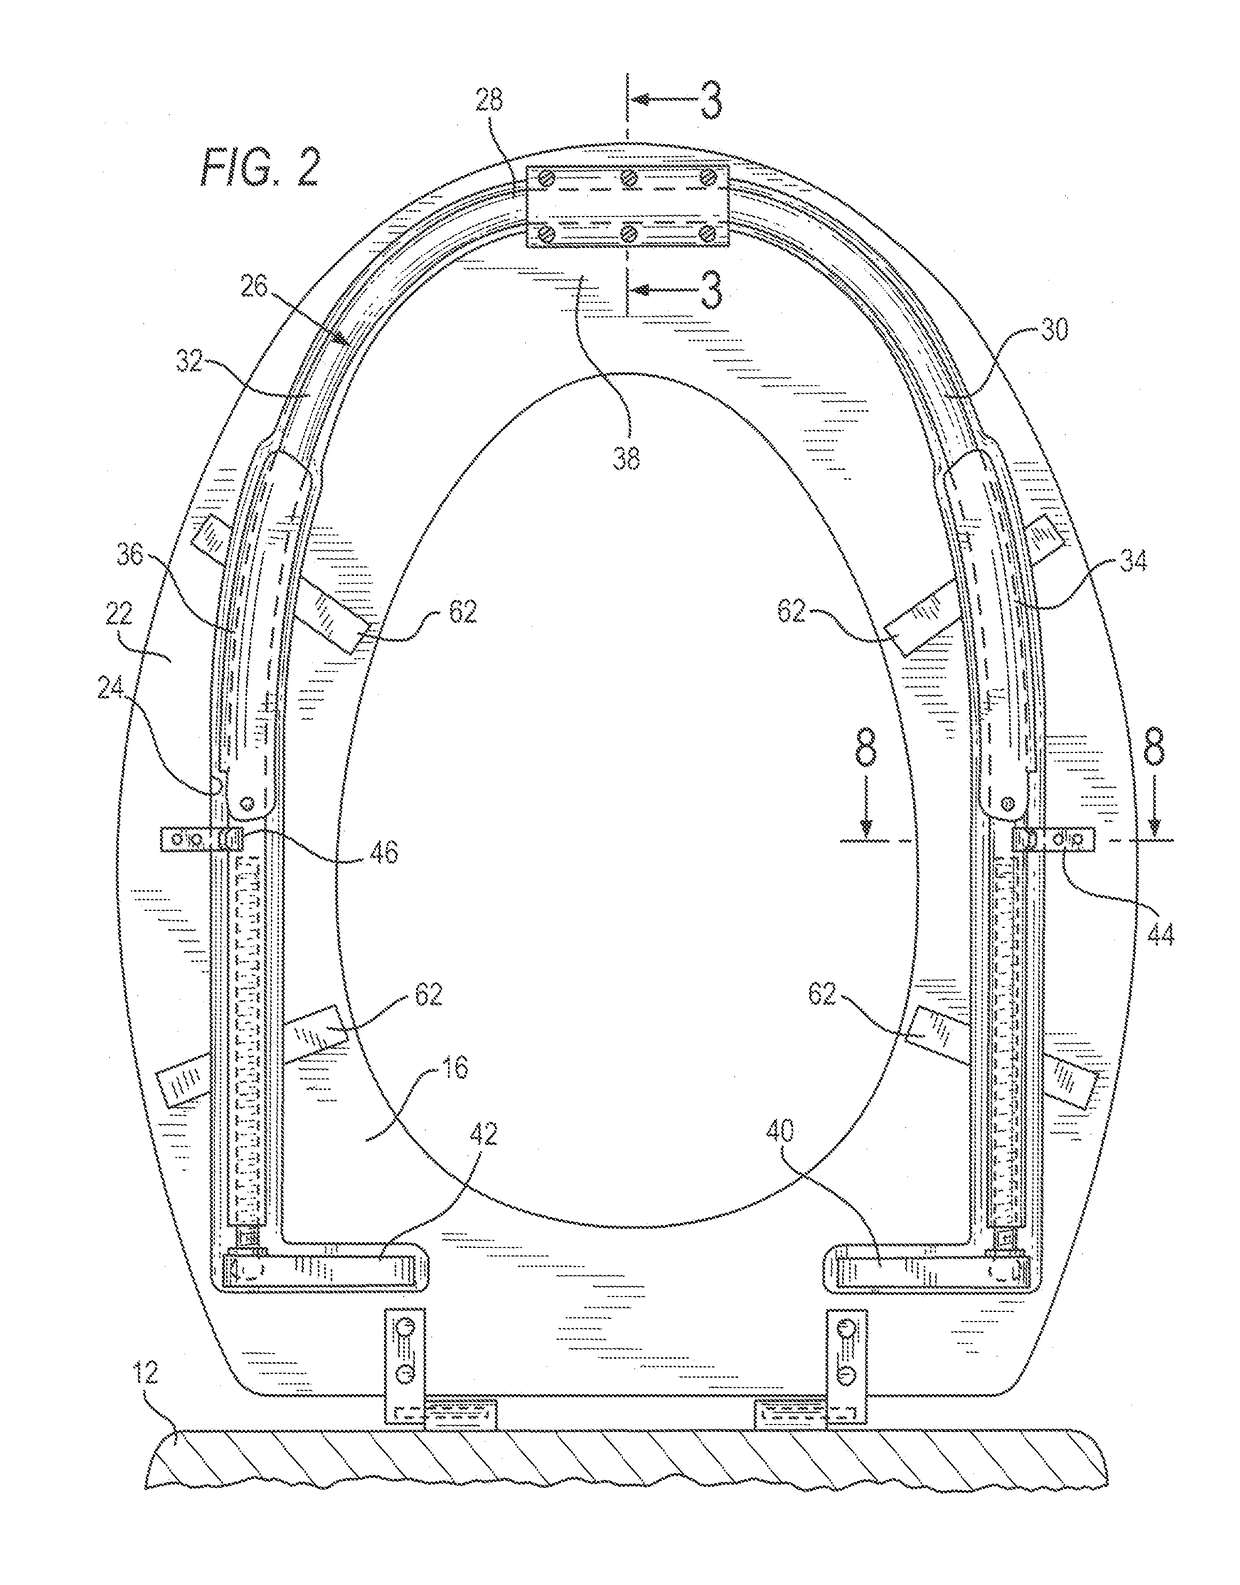 Device and assembly for, and method of, converting a sitting toilet to a squat toilet